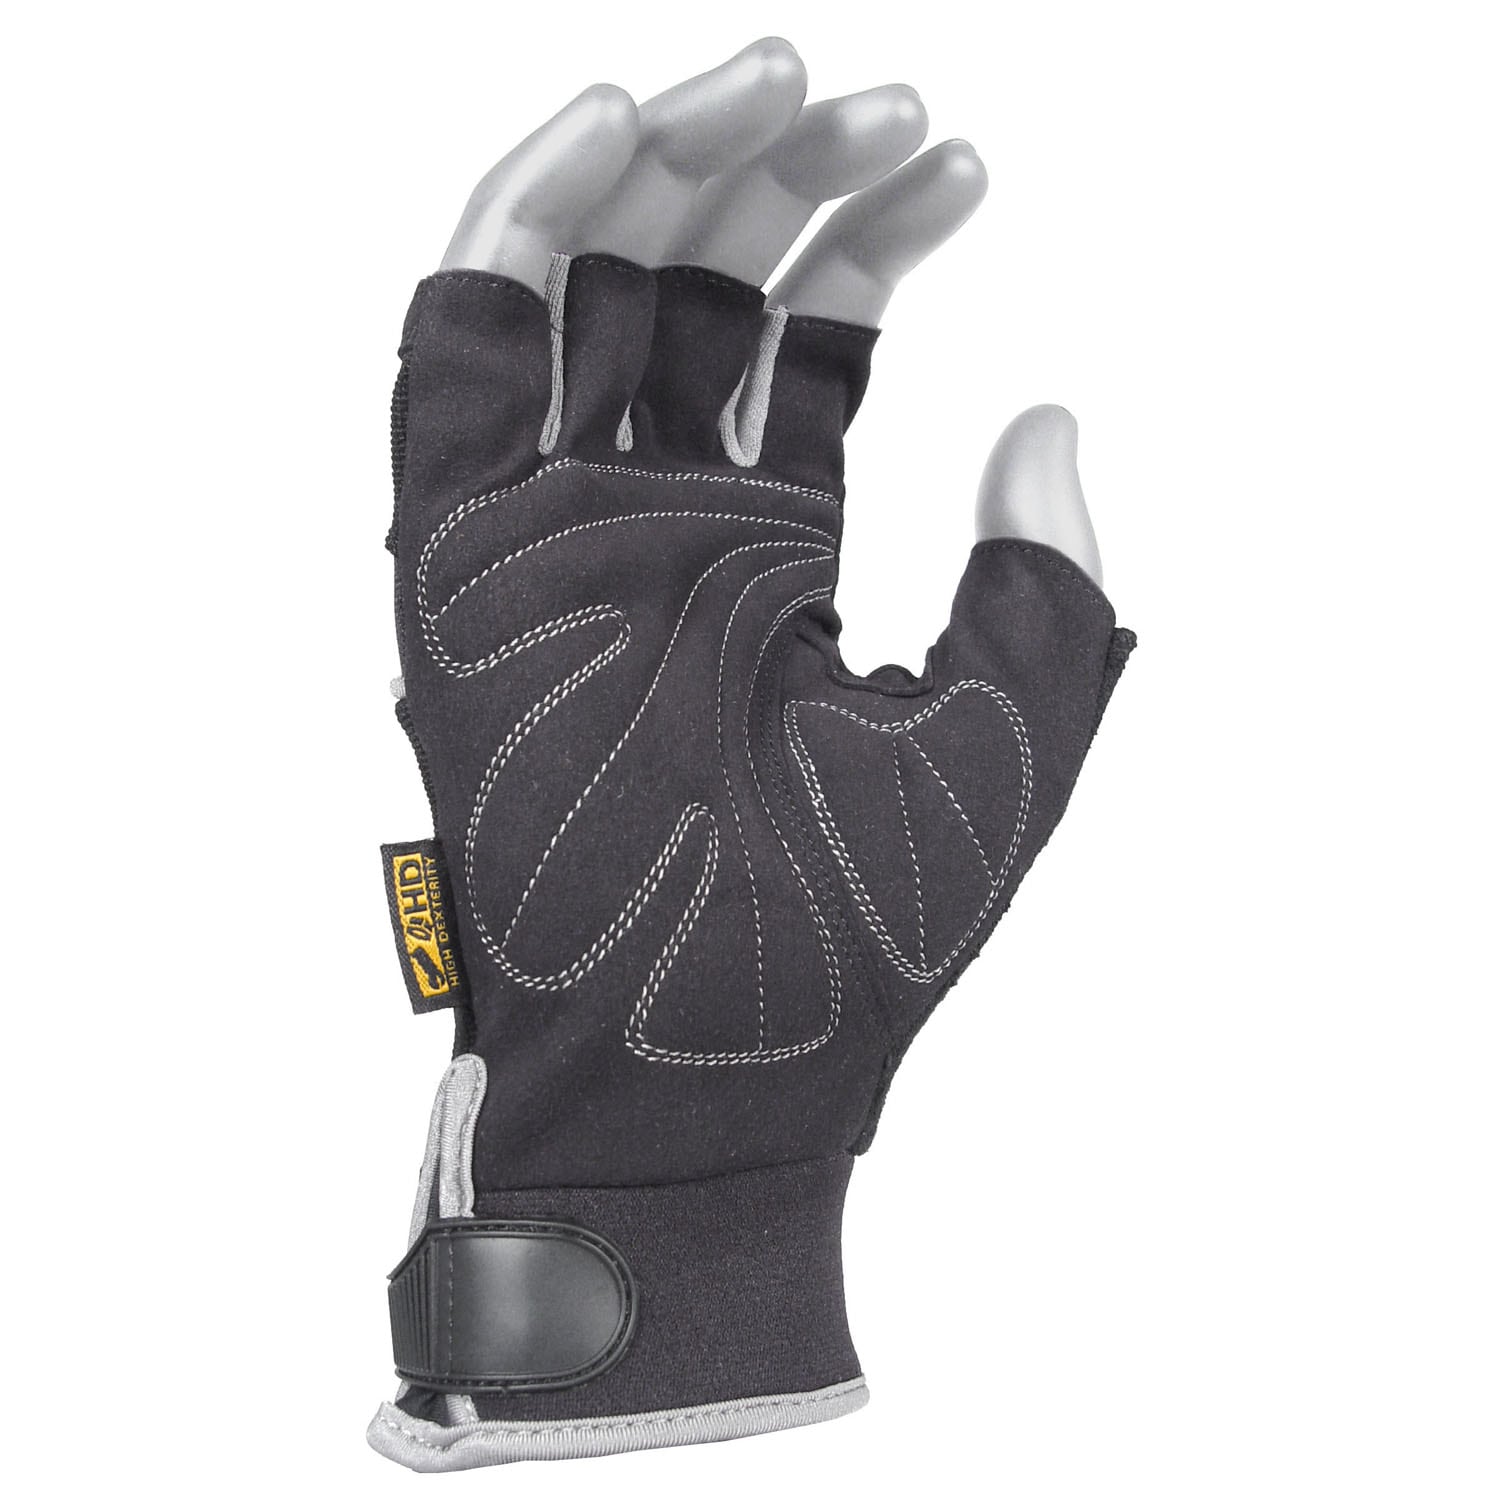 DEWALT X-large Black Synthetic Leather Gloves, (1-Pair) in the